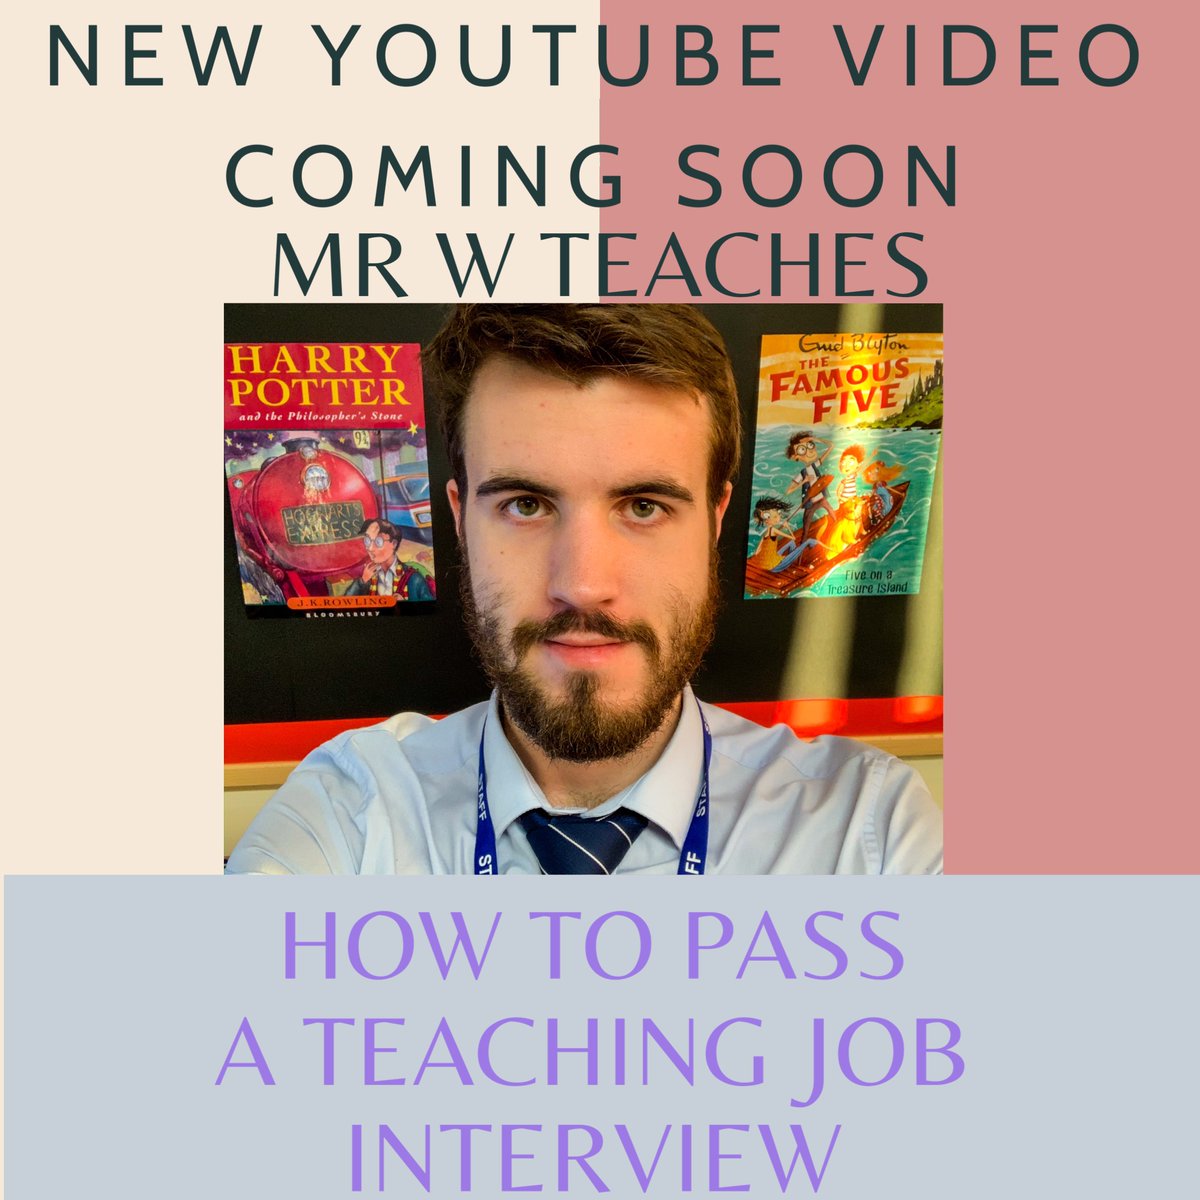 How To Pass A Teaching Job Interview

NEW VIDEO COMING SOON

Check out my channel for more helpful teaching videos (LINK IN BIO)

Let me know if there is anything you want answering in this video in particular!

#edutwitter #primaryteacher #interview #trainee #teachertrainee